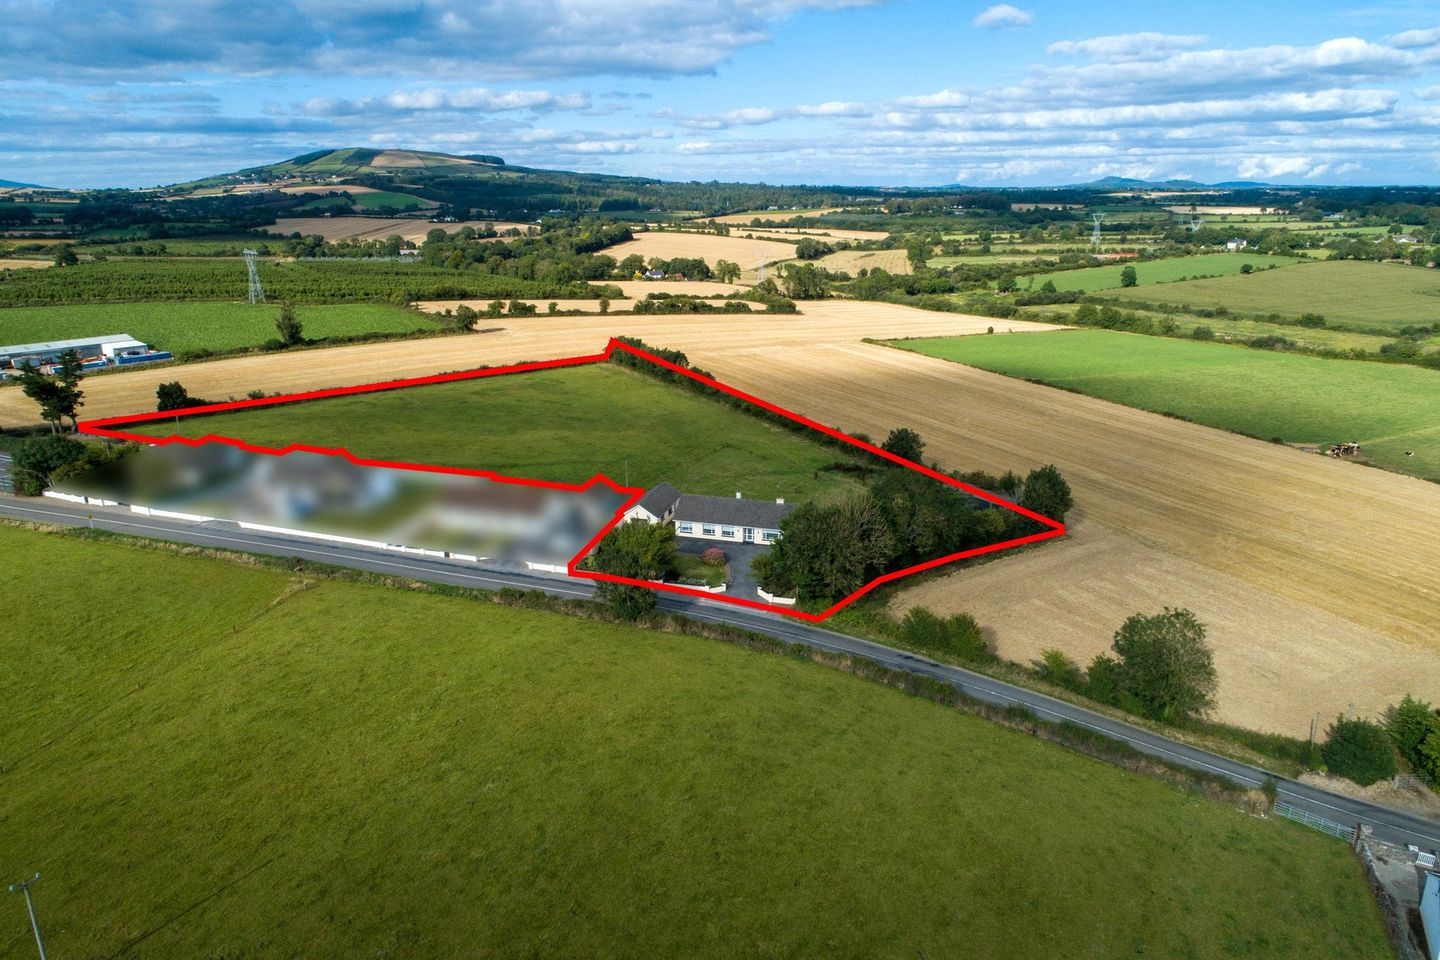 Horeswood On 3.65 Acres, Campile, Co. Wexford